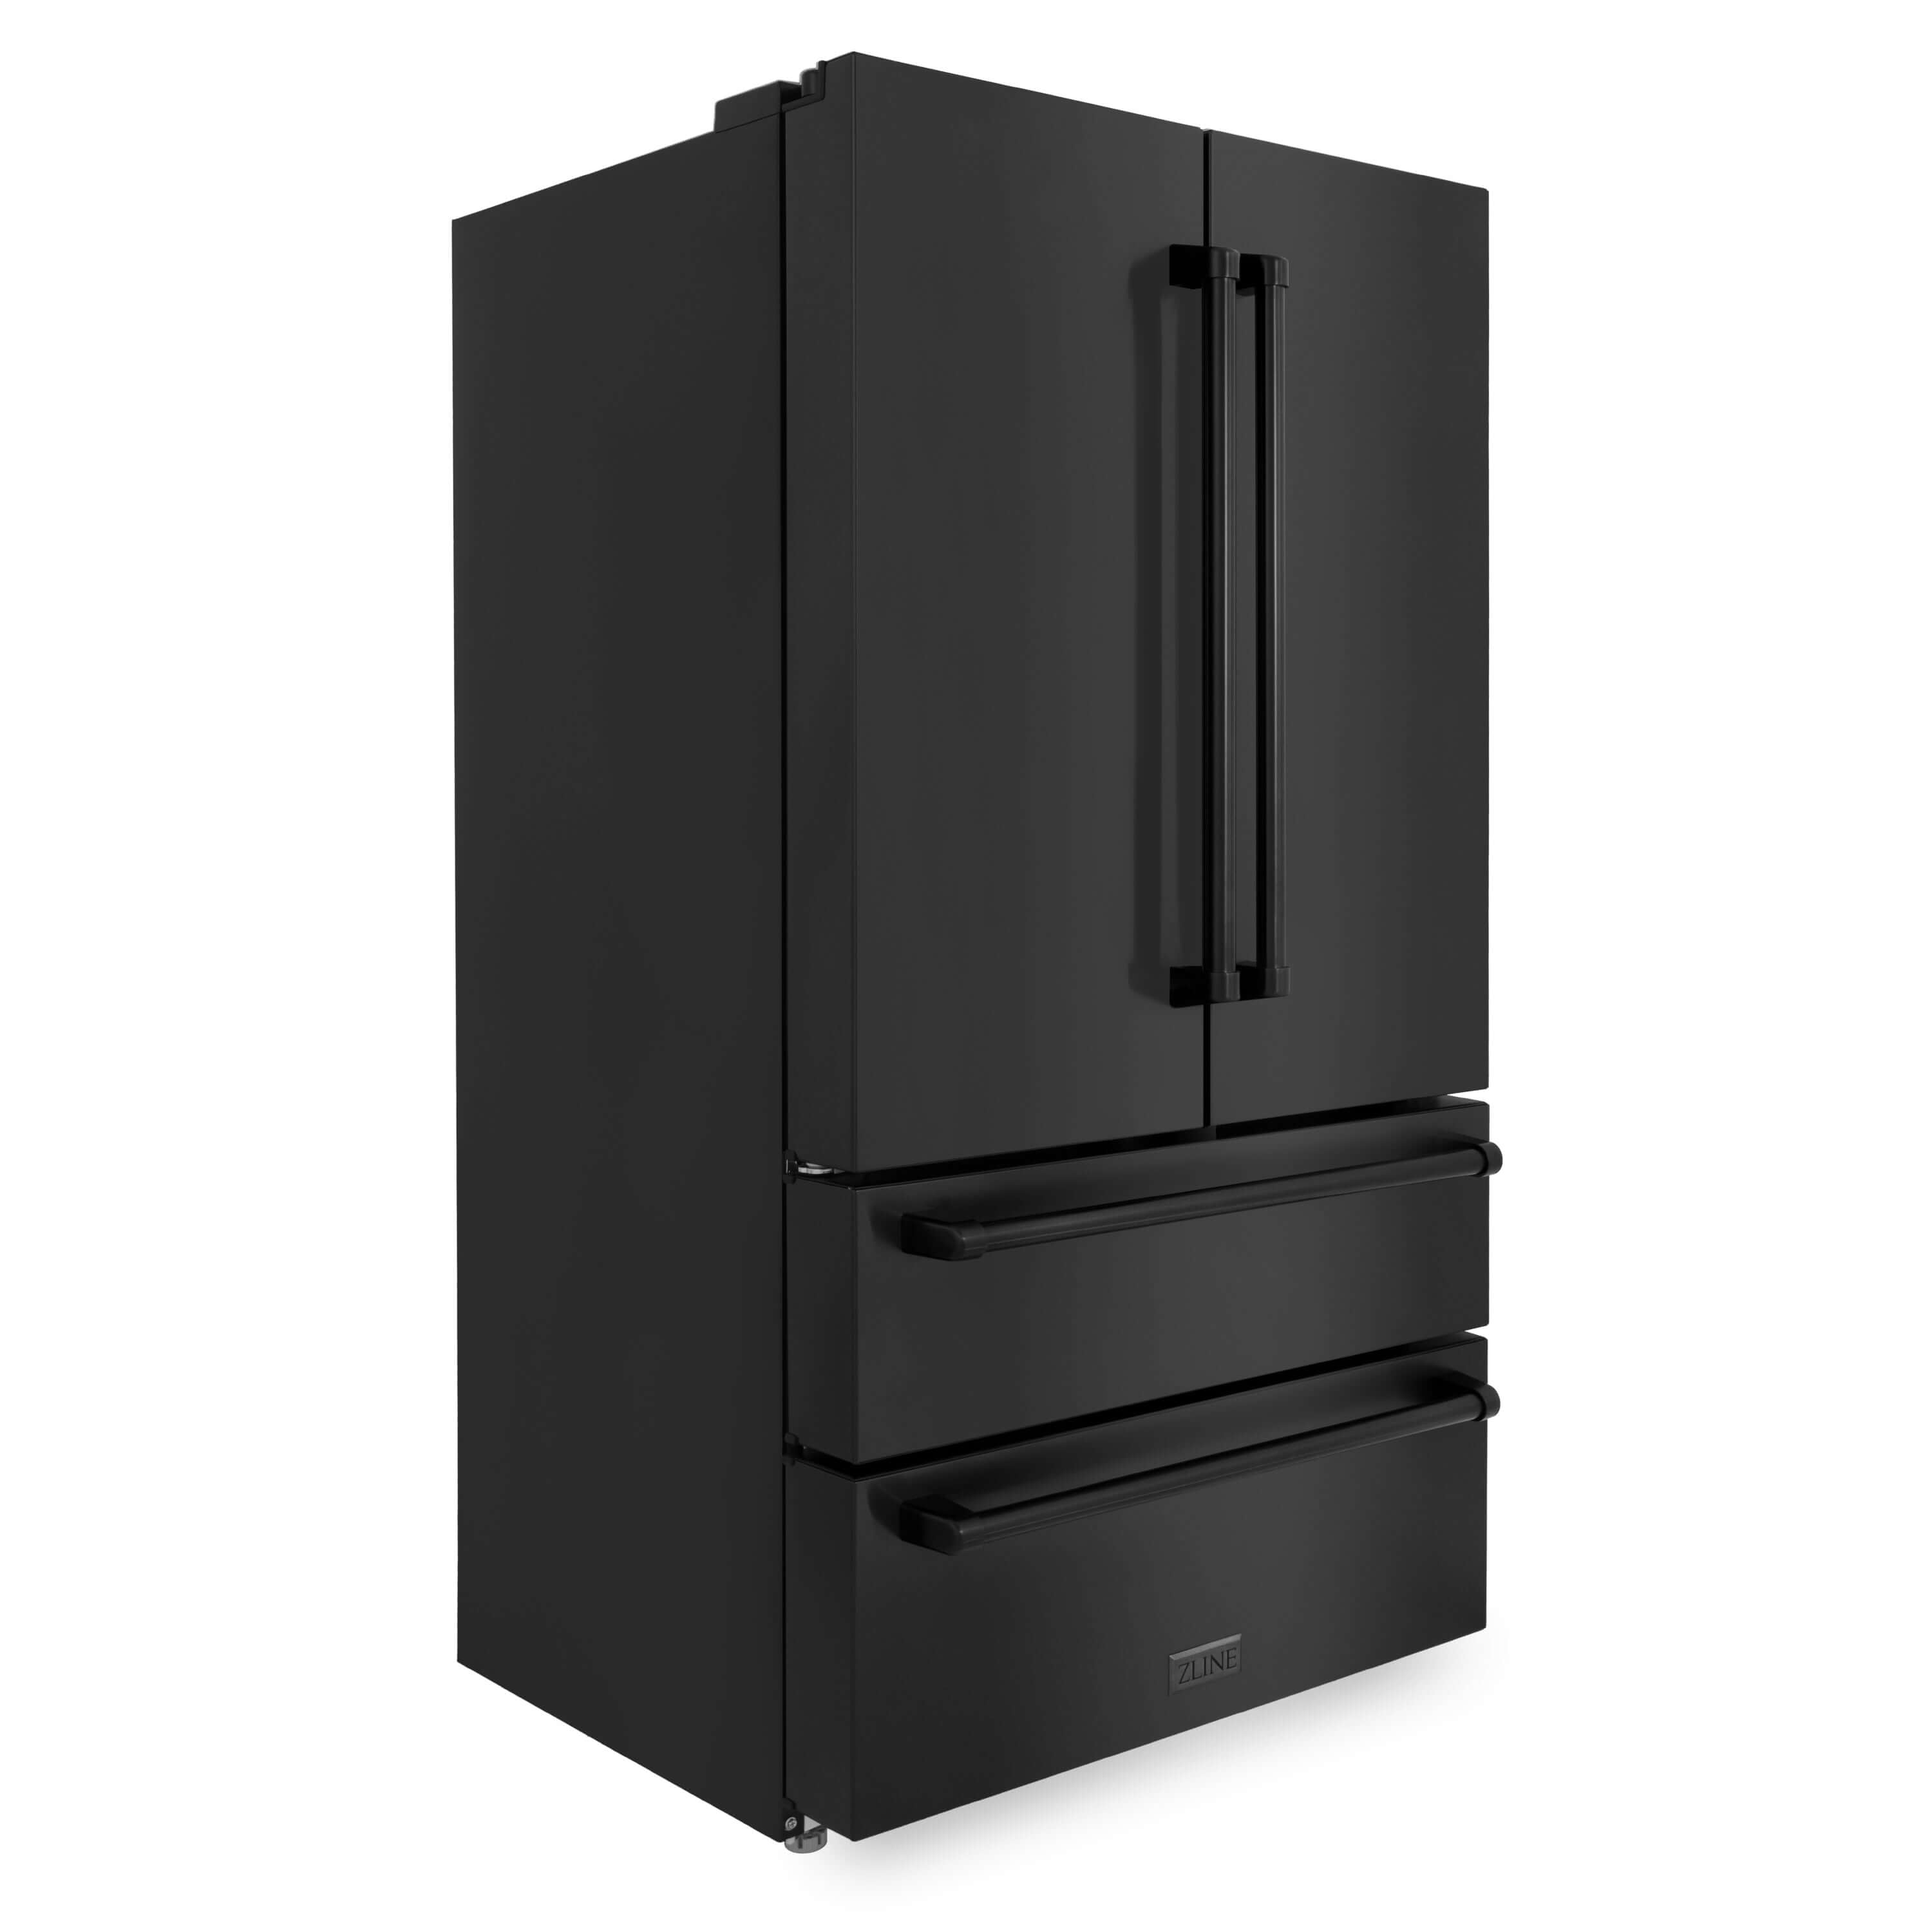 ZLINE 36 in. Freestanding French Door Refrigerator with Ice Maker in Black Stainless Steel (RFM-36-BS) side, closed.